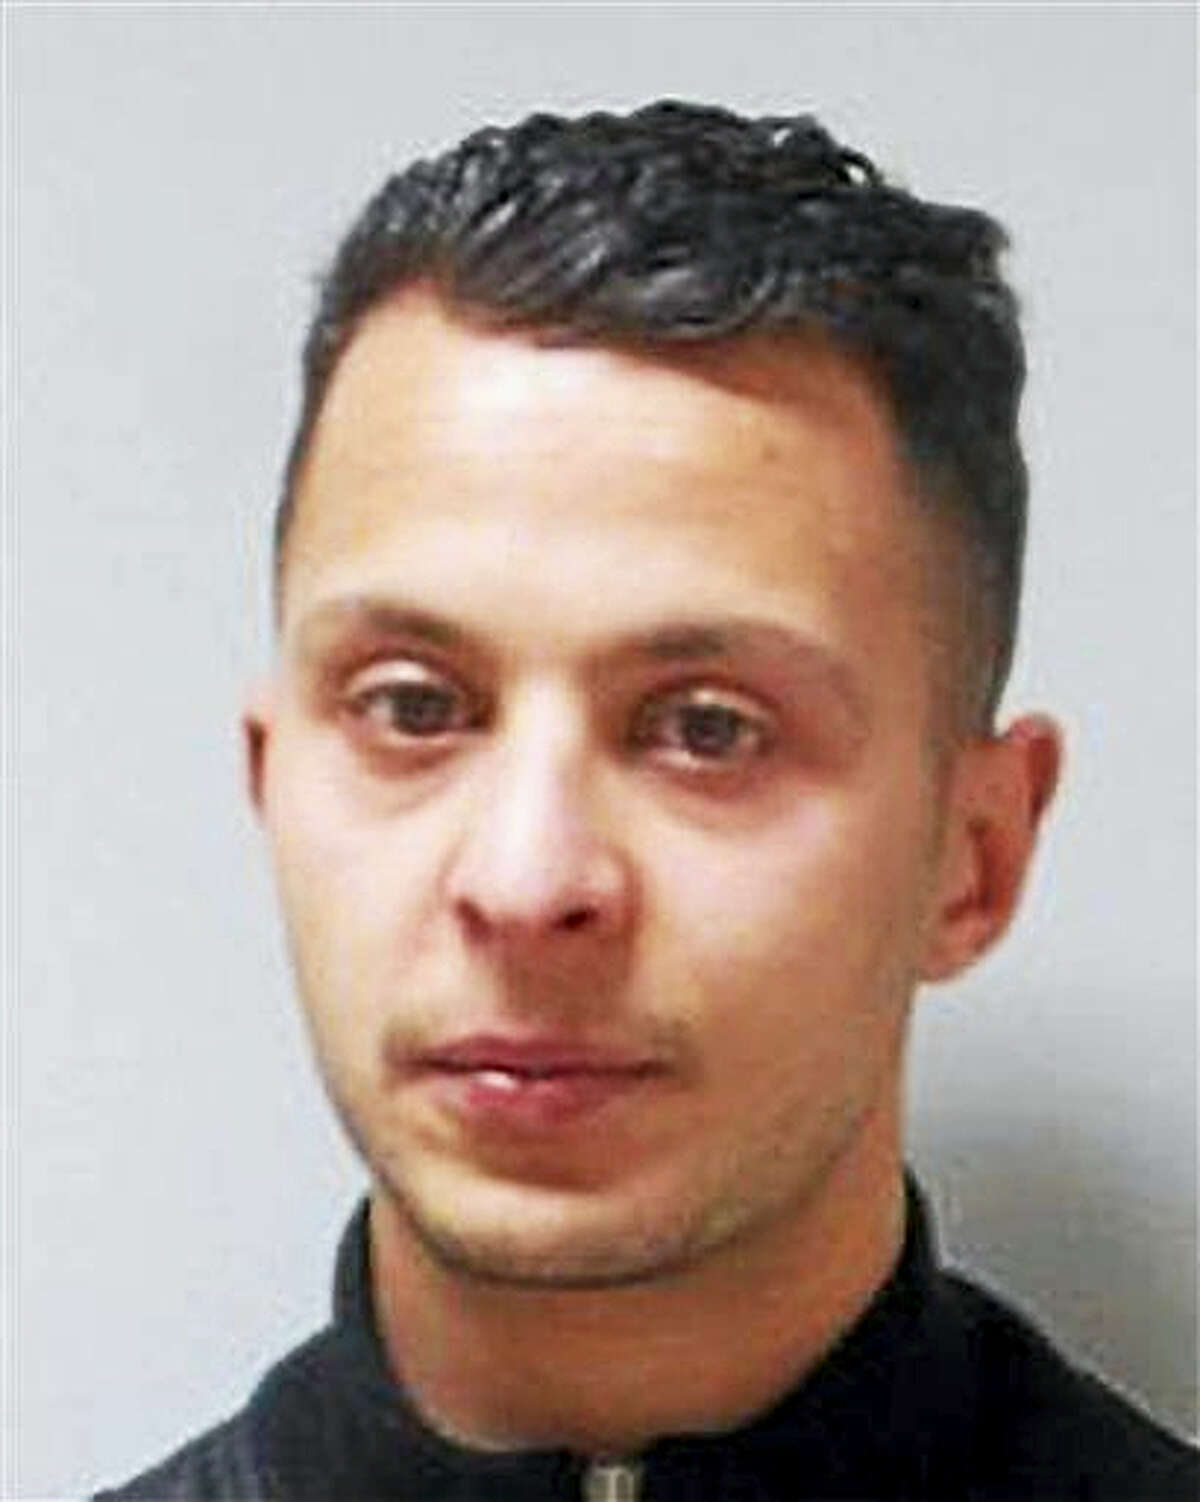 This undated file photo provided by the Belgian Federal Police shows 26-year old Salah Abdeslam, who is wanted by police in connection with recent terror attacks in Paris. Belgian prosecutors said Friday March 18, 2016, that fingerprints of Paris attacks fugitive Salah Abdeslam found in Brussels apartment that was raided earlier this week.